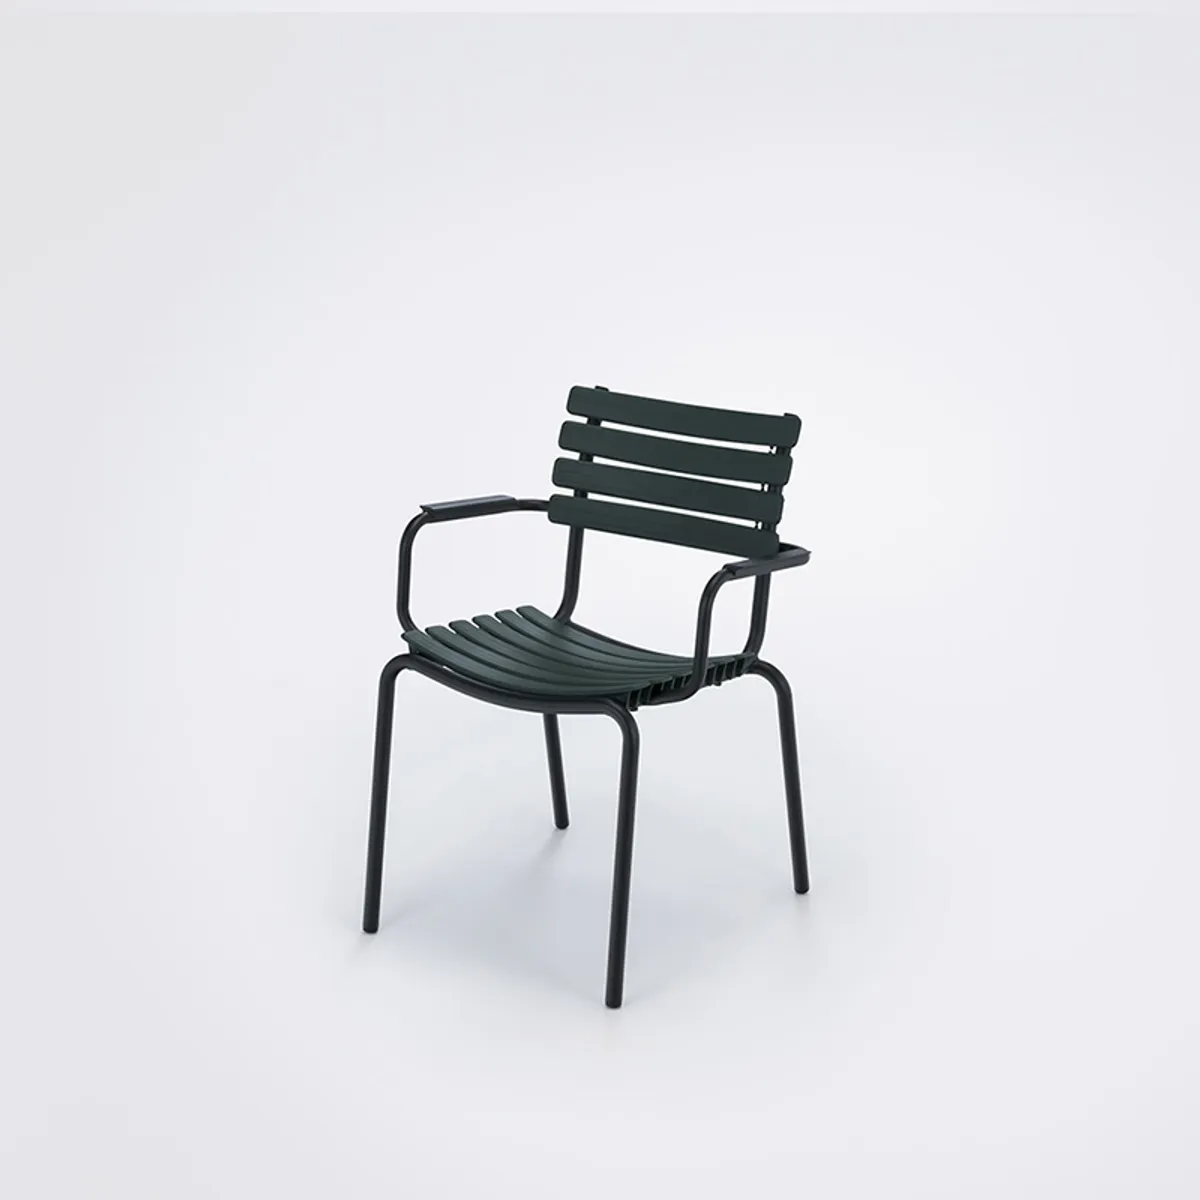 Snip Chair Metal And Plastic Outdoor Chair For Hotels And Cafe Gardens 340